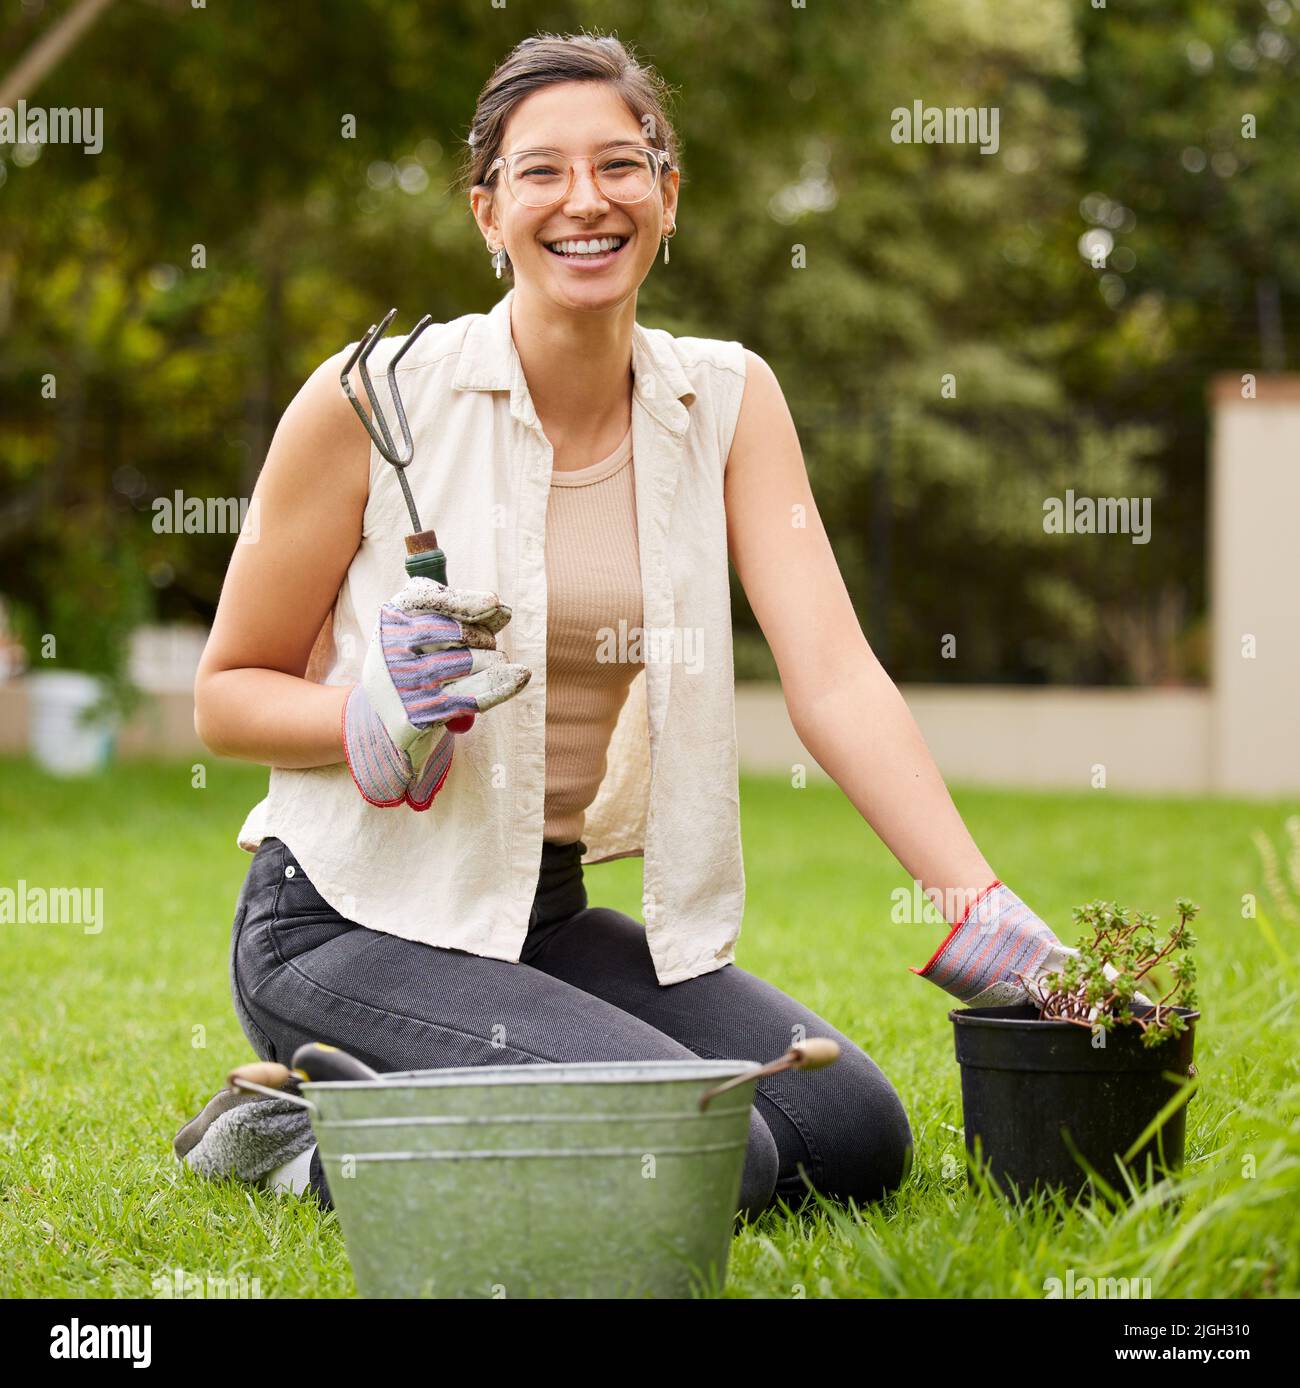 A buffet of growth just for me. Portrait of a smiling woman kneeling while doing some gardening in the backyard. Stock Photo